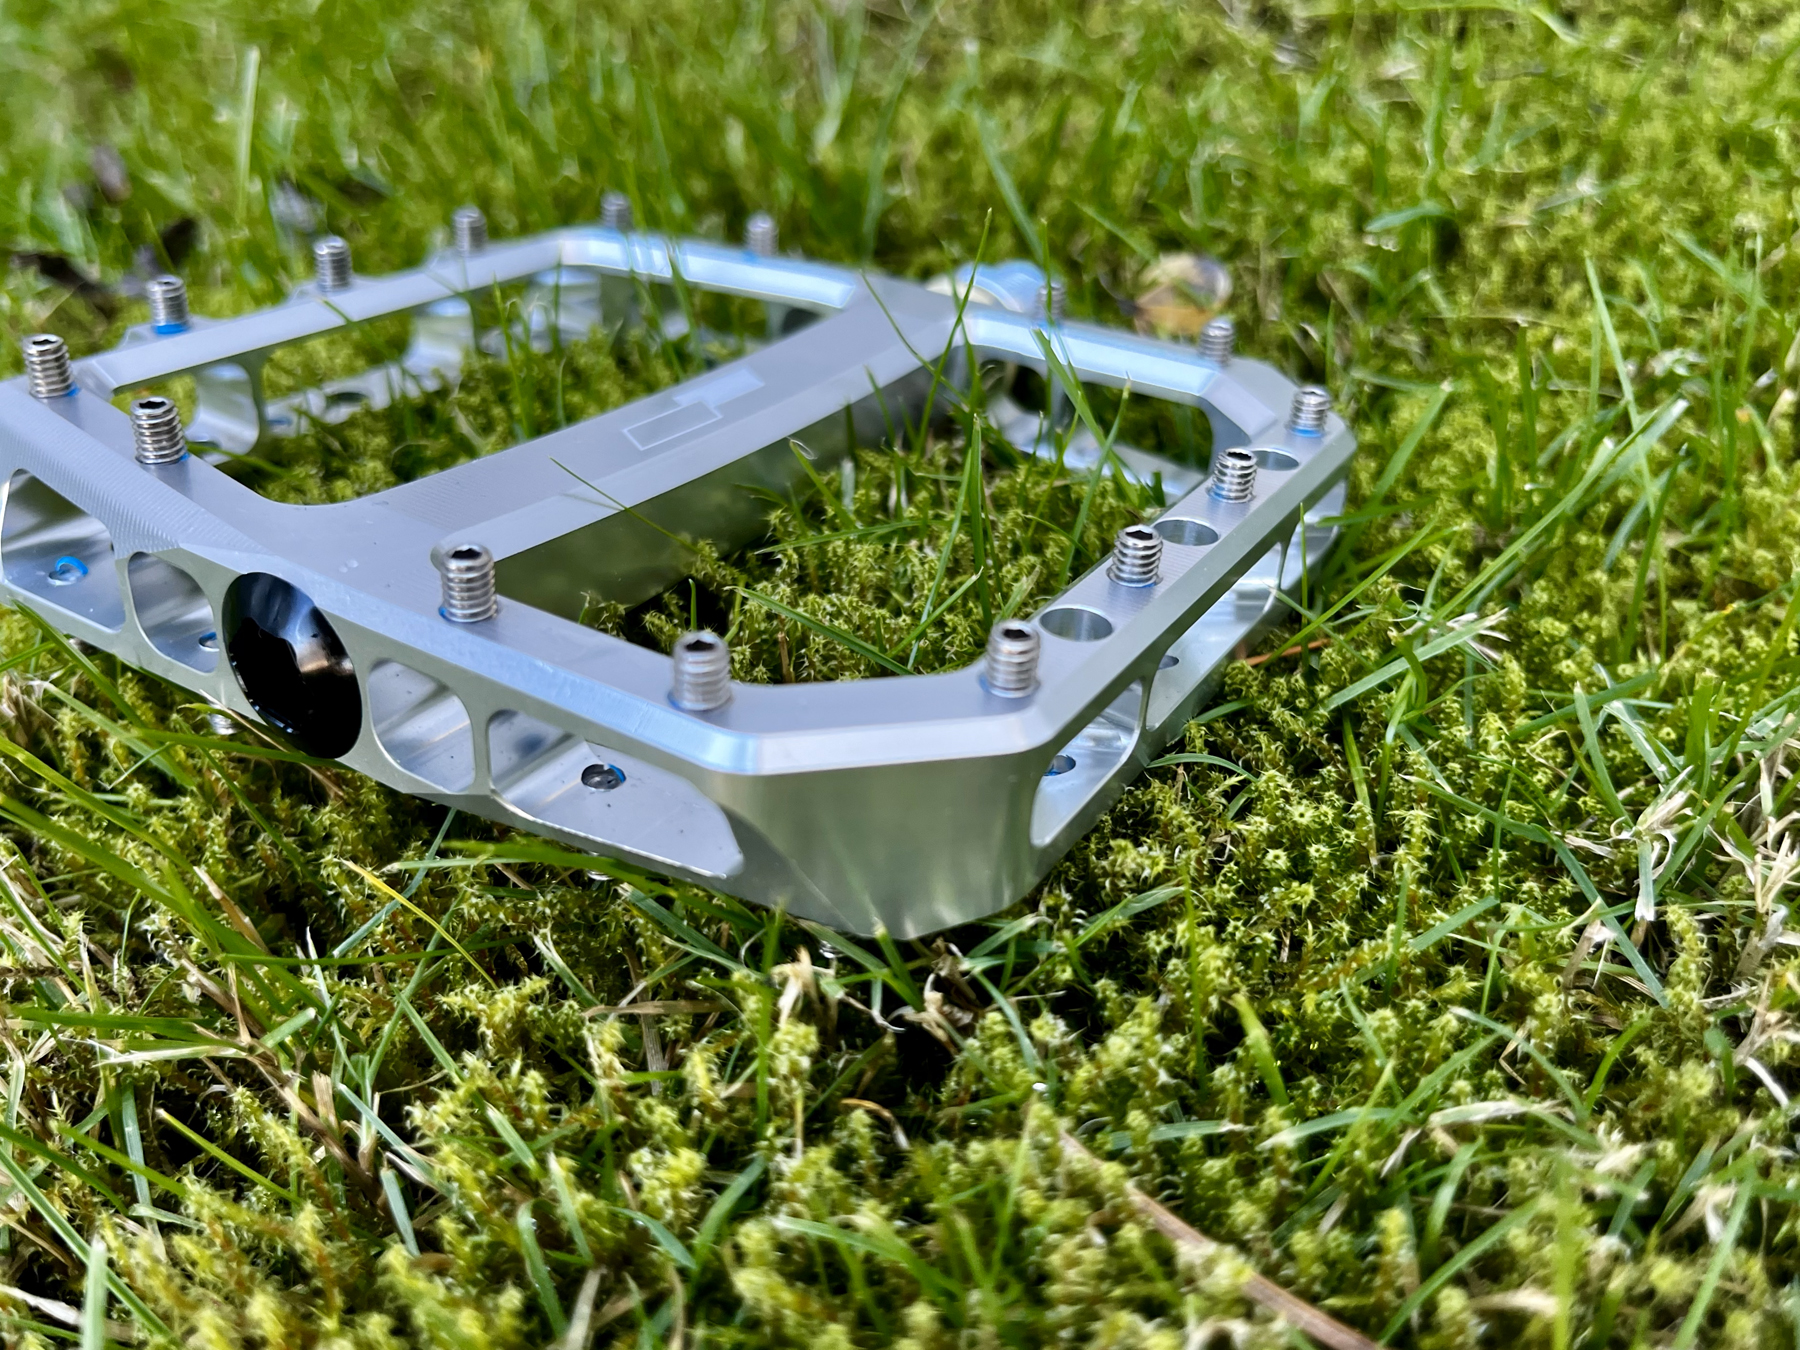 Zack Henderson reviews the Sensus Crue pedals for Blister